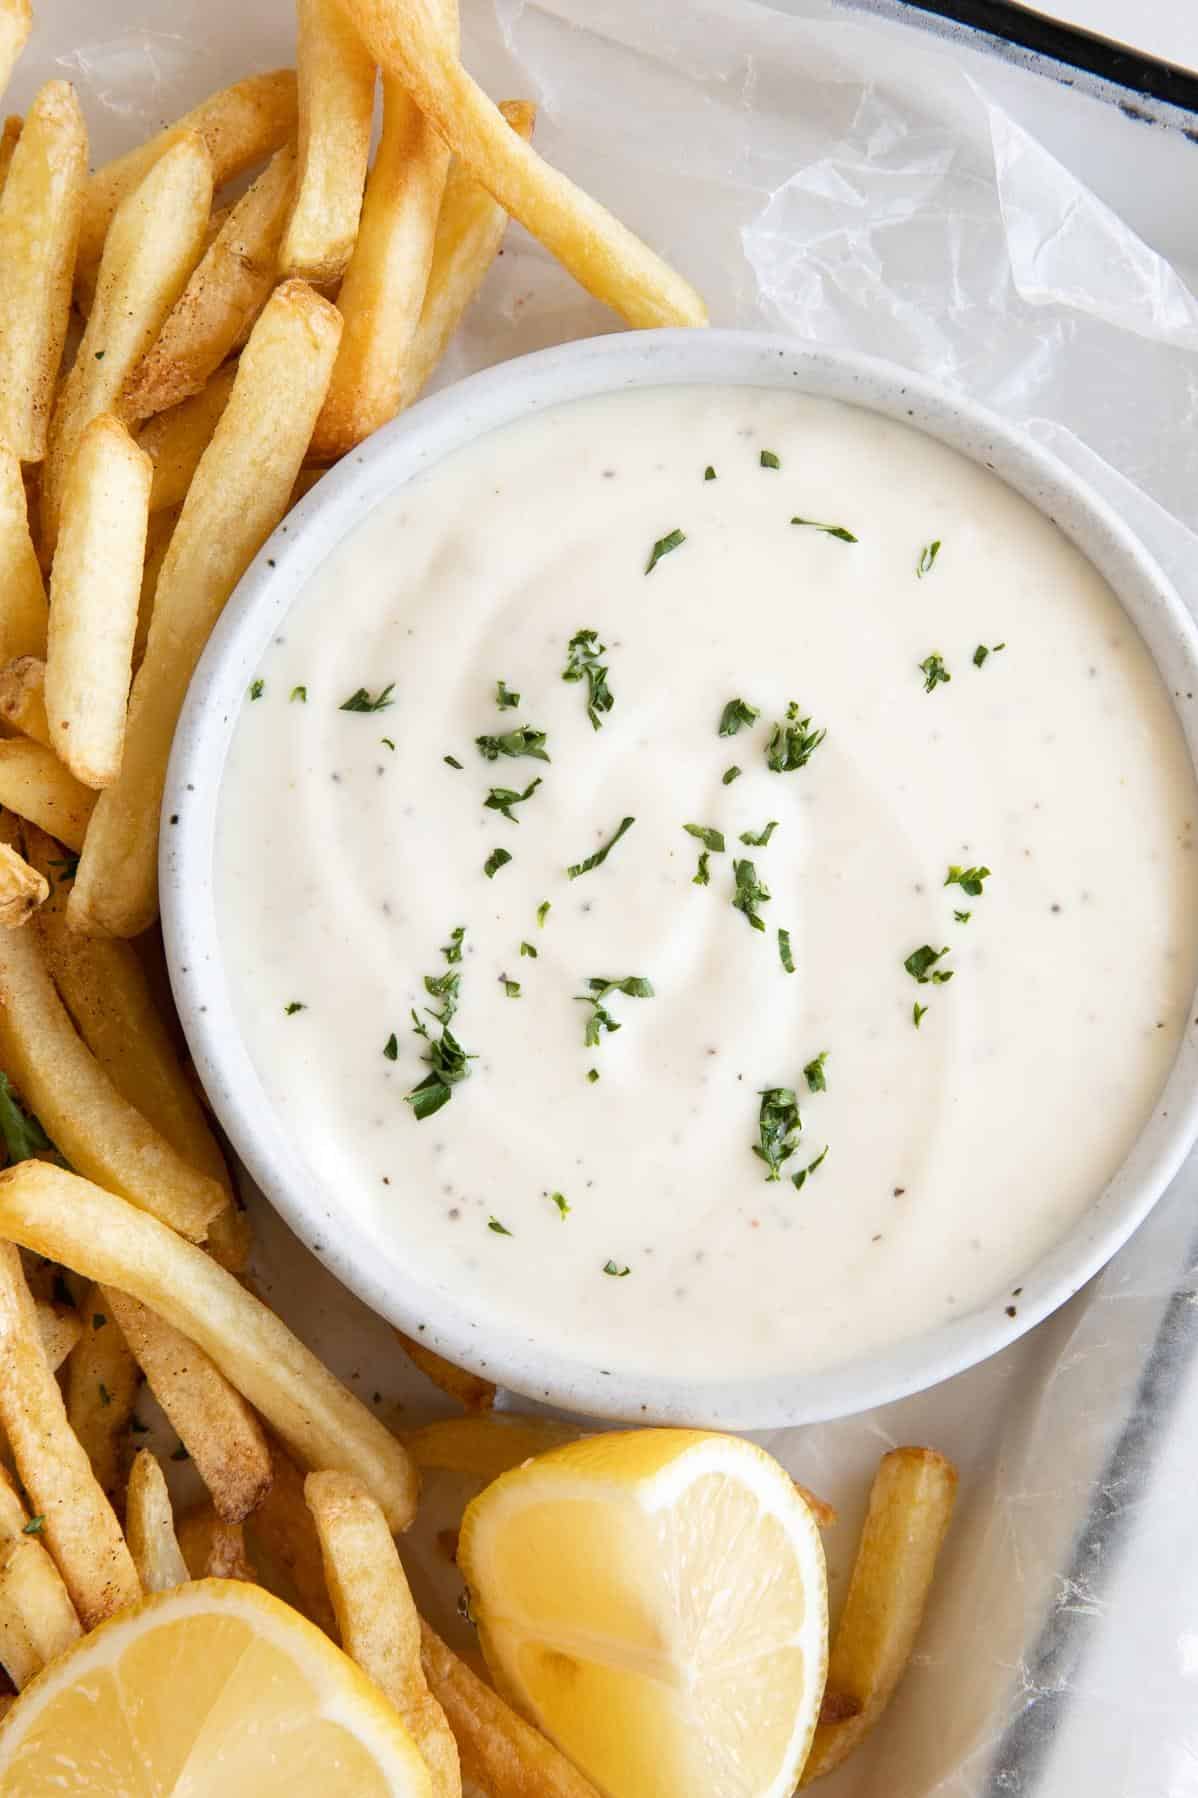  A dipping sauce that won't weigh you down